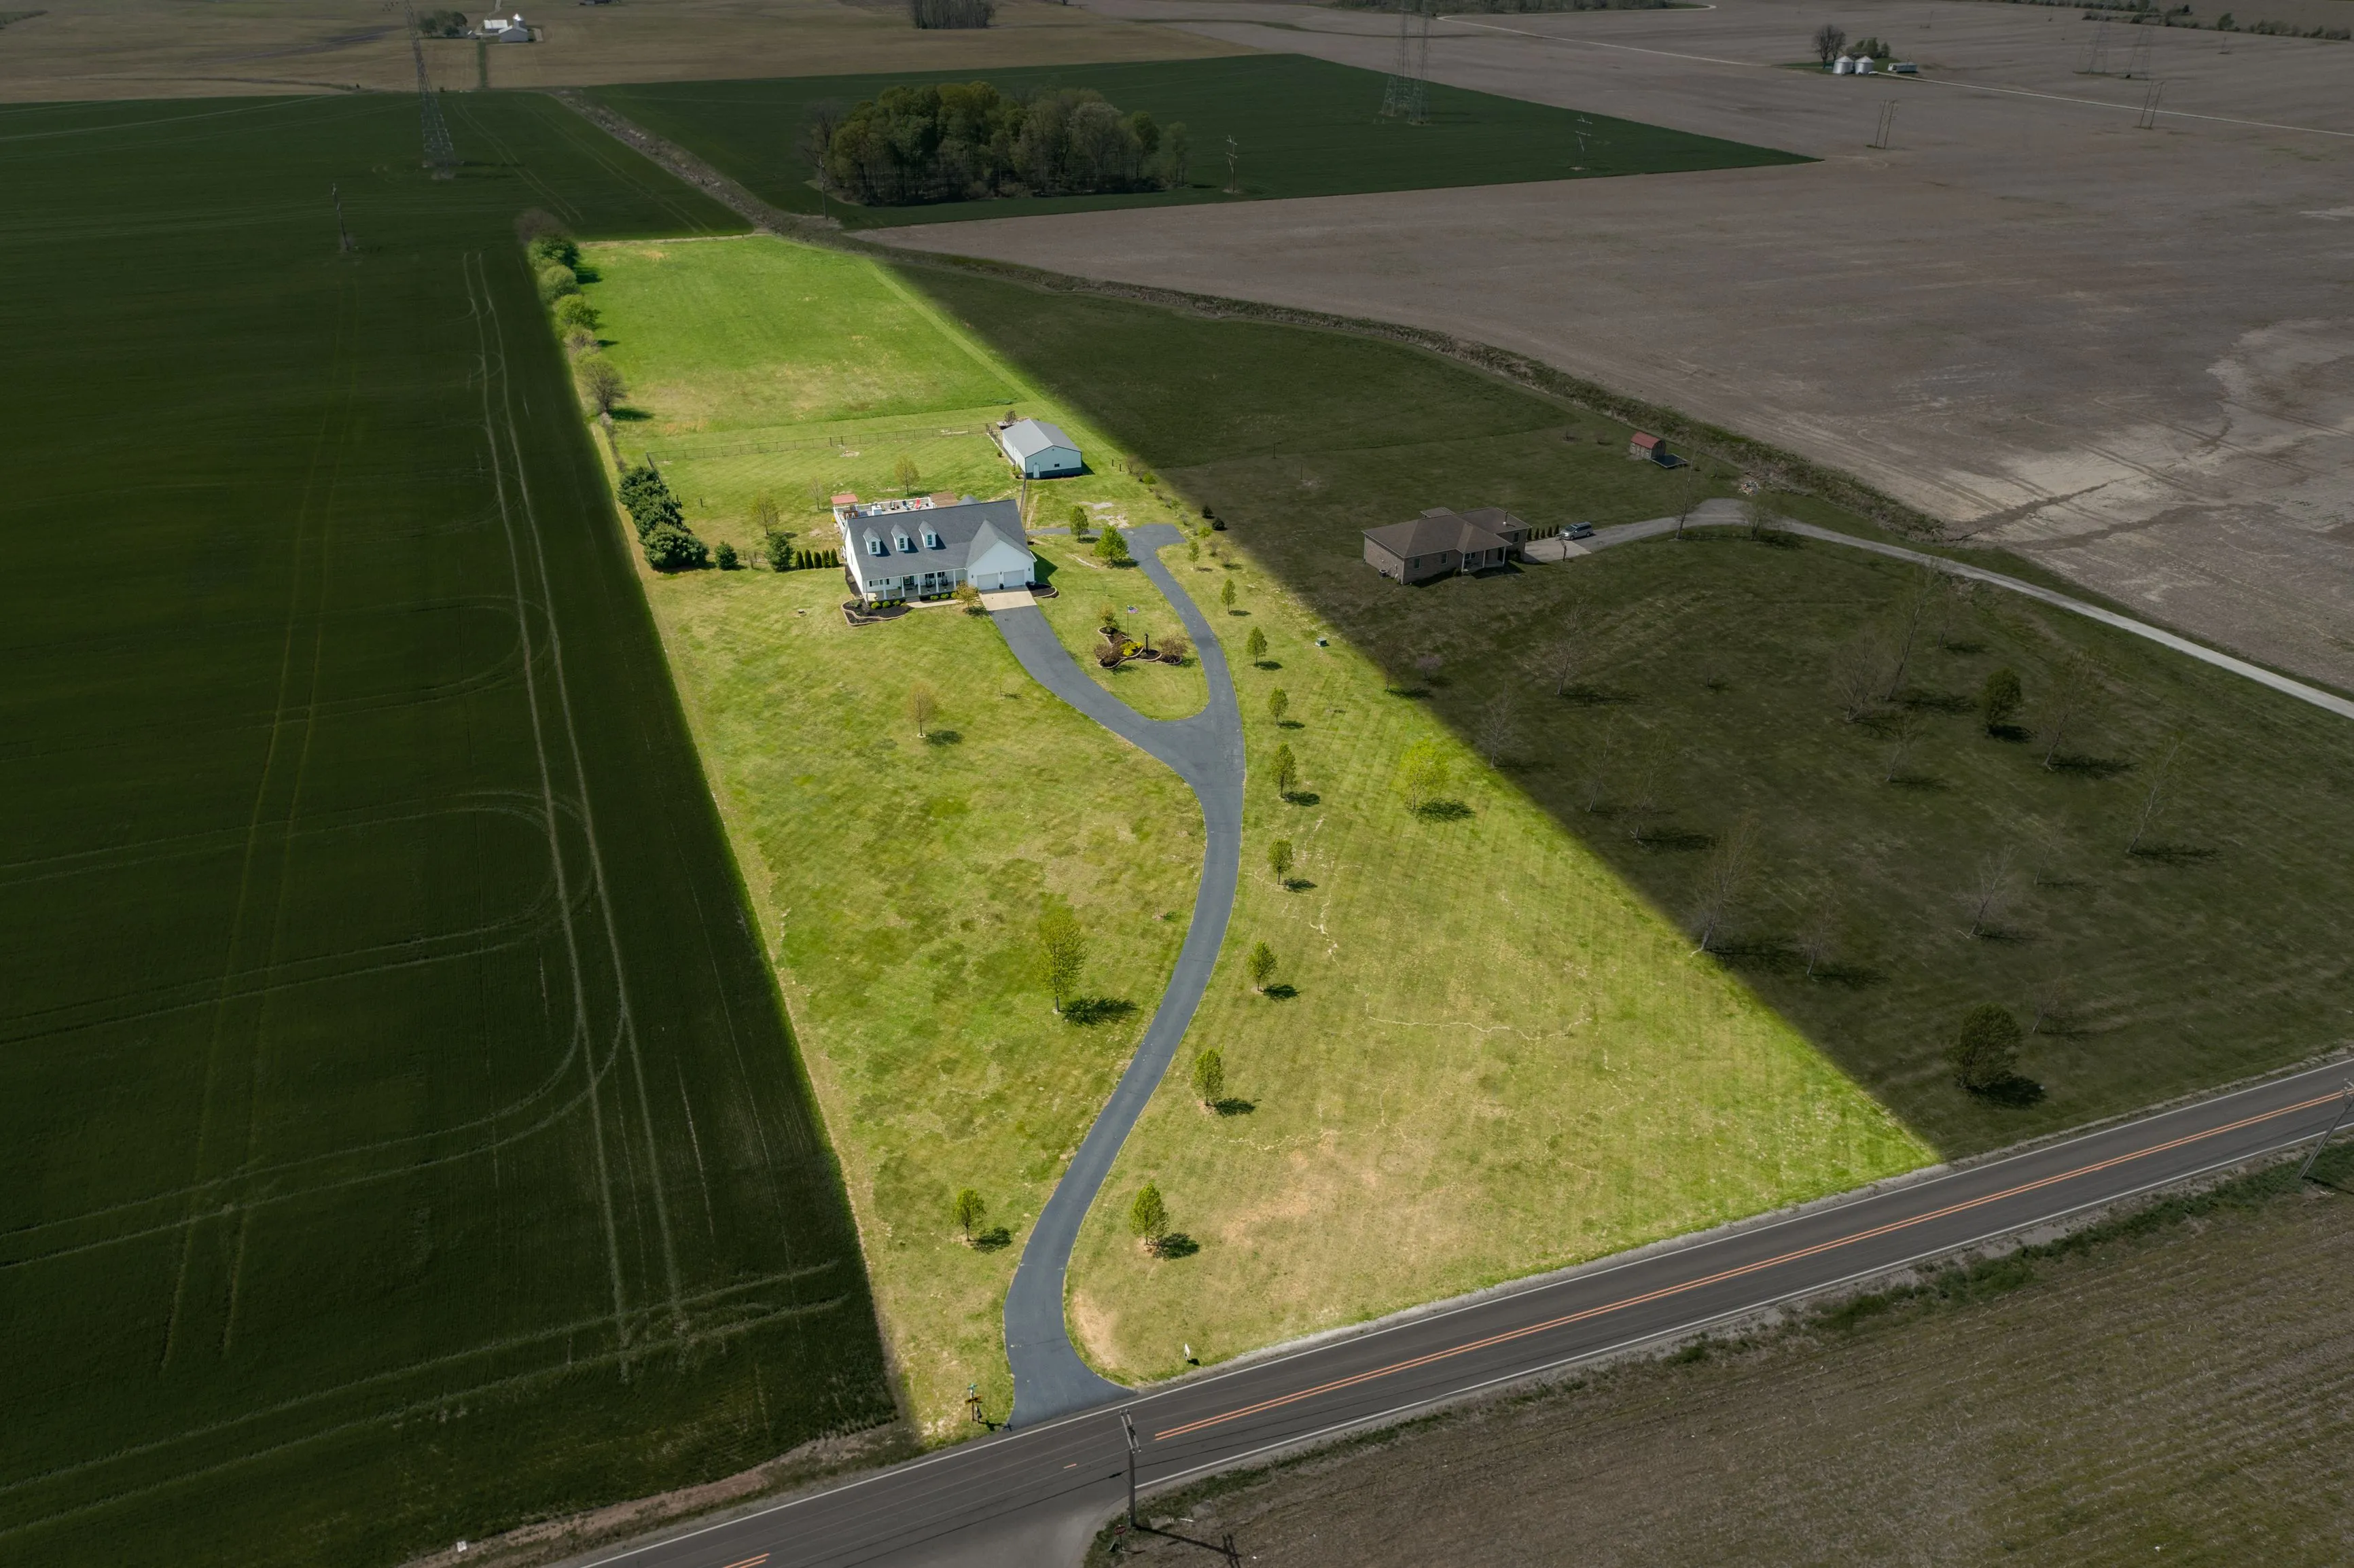 Aerial view of a green rectangular land plot with a curvy path leading to a house, surrounded by fields with varying shades of brown.